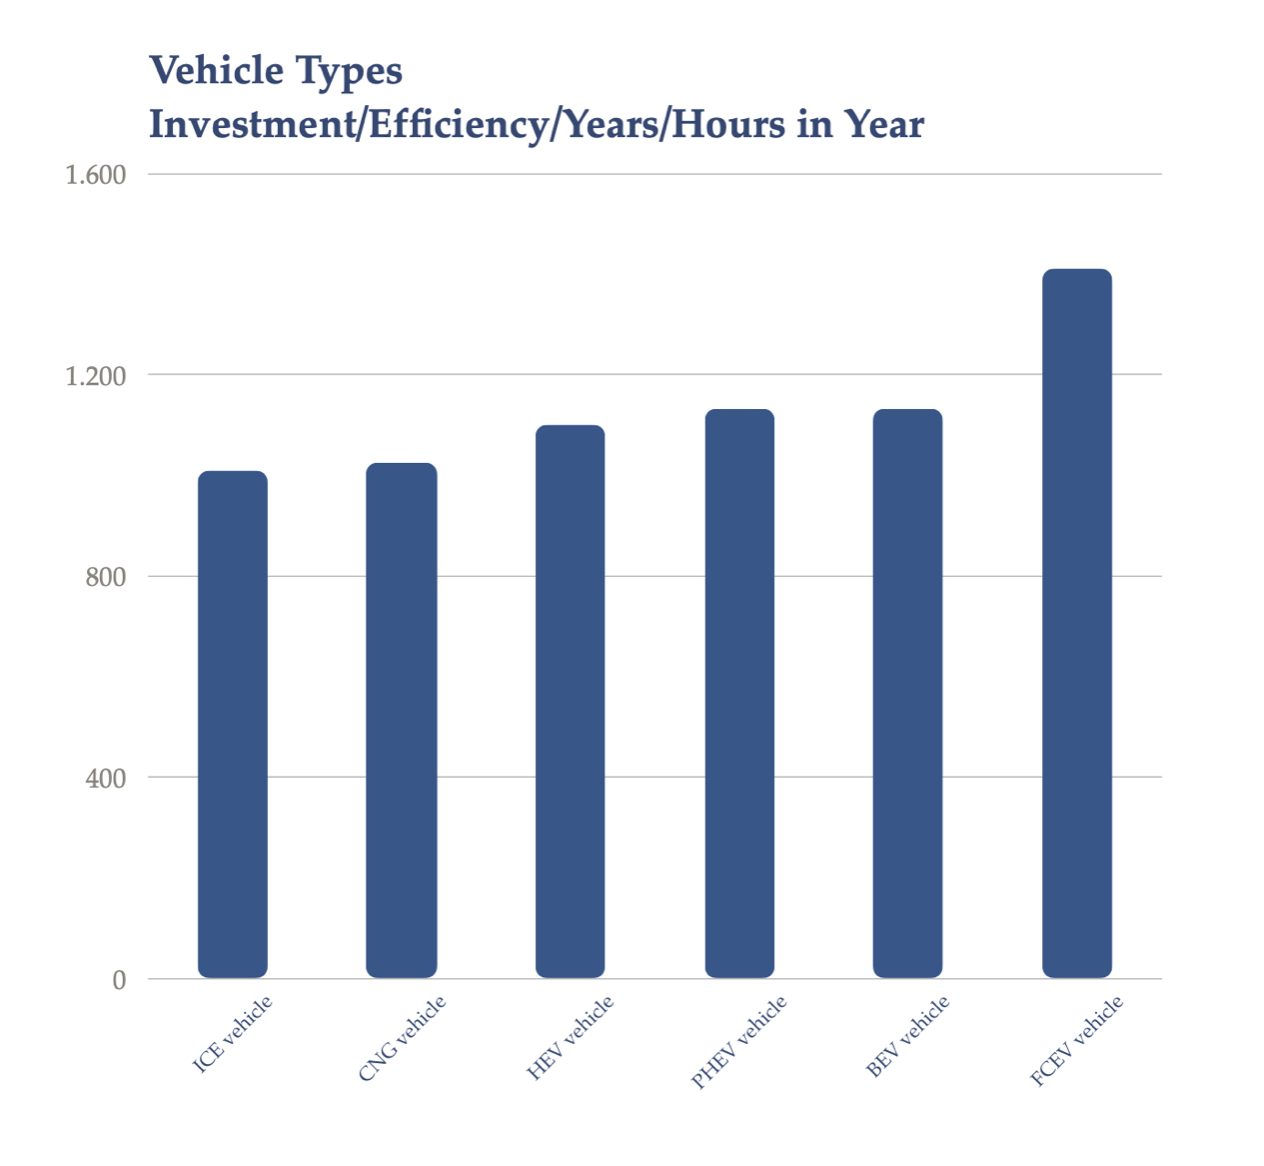 Bar chart comparing vehicle types with investment effiency